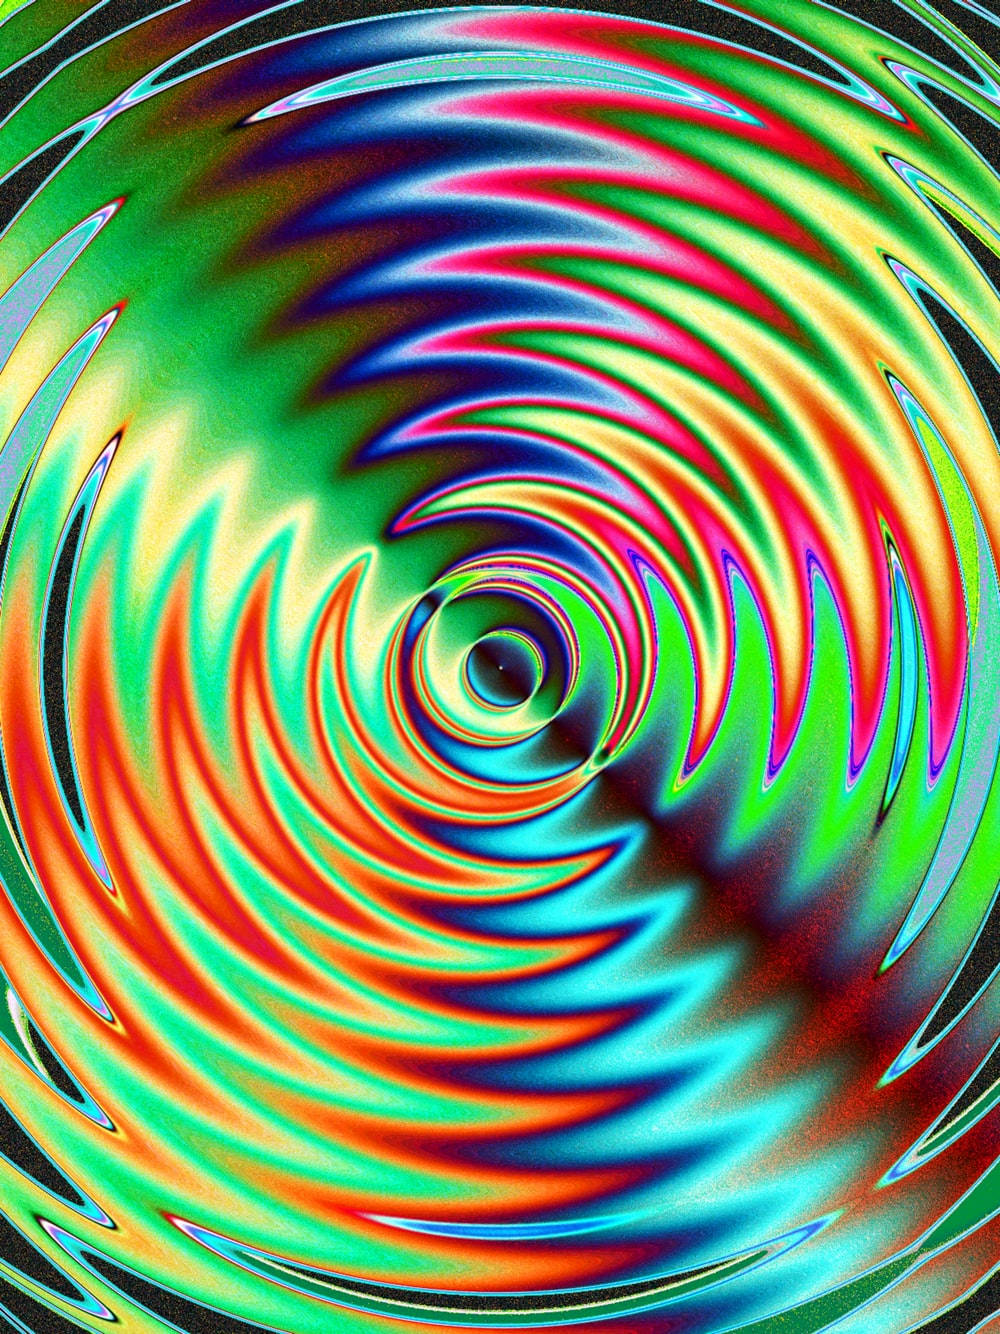 Psychedelic Iphone Colorful Disk Wallpaper